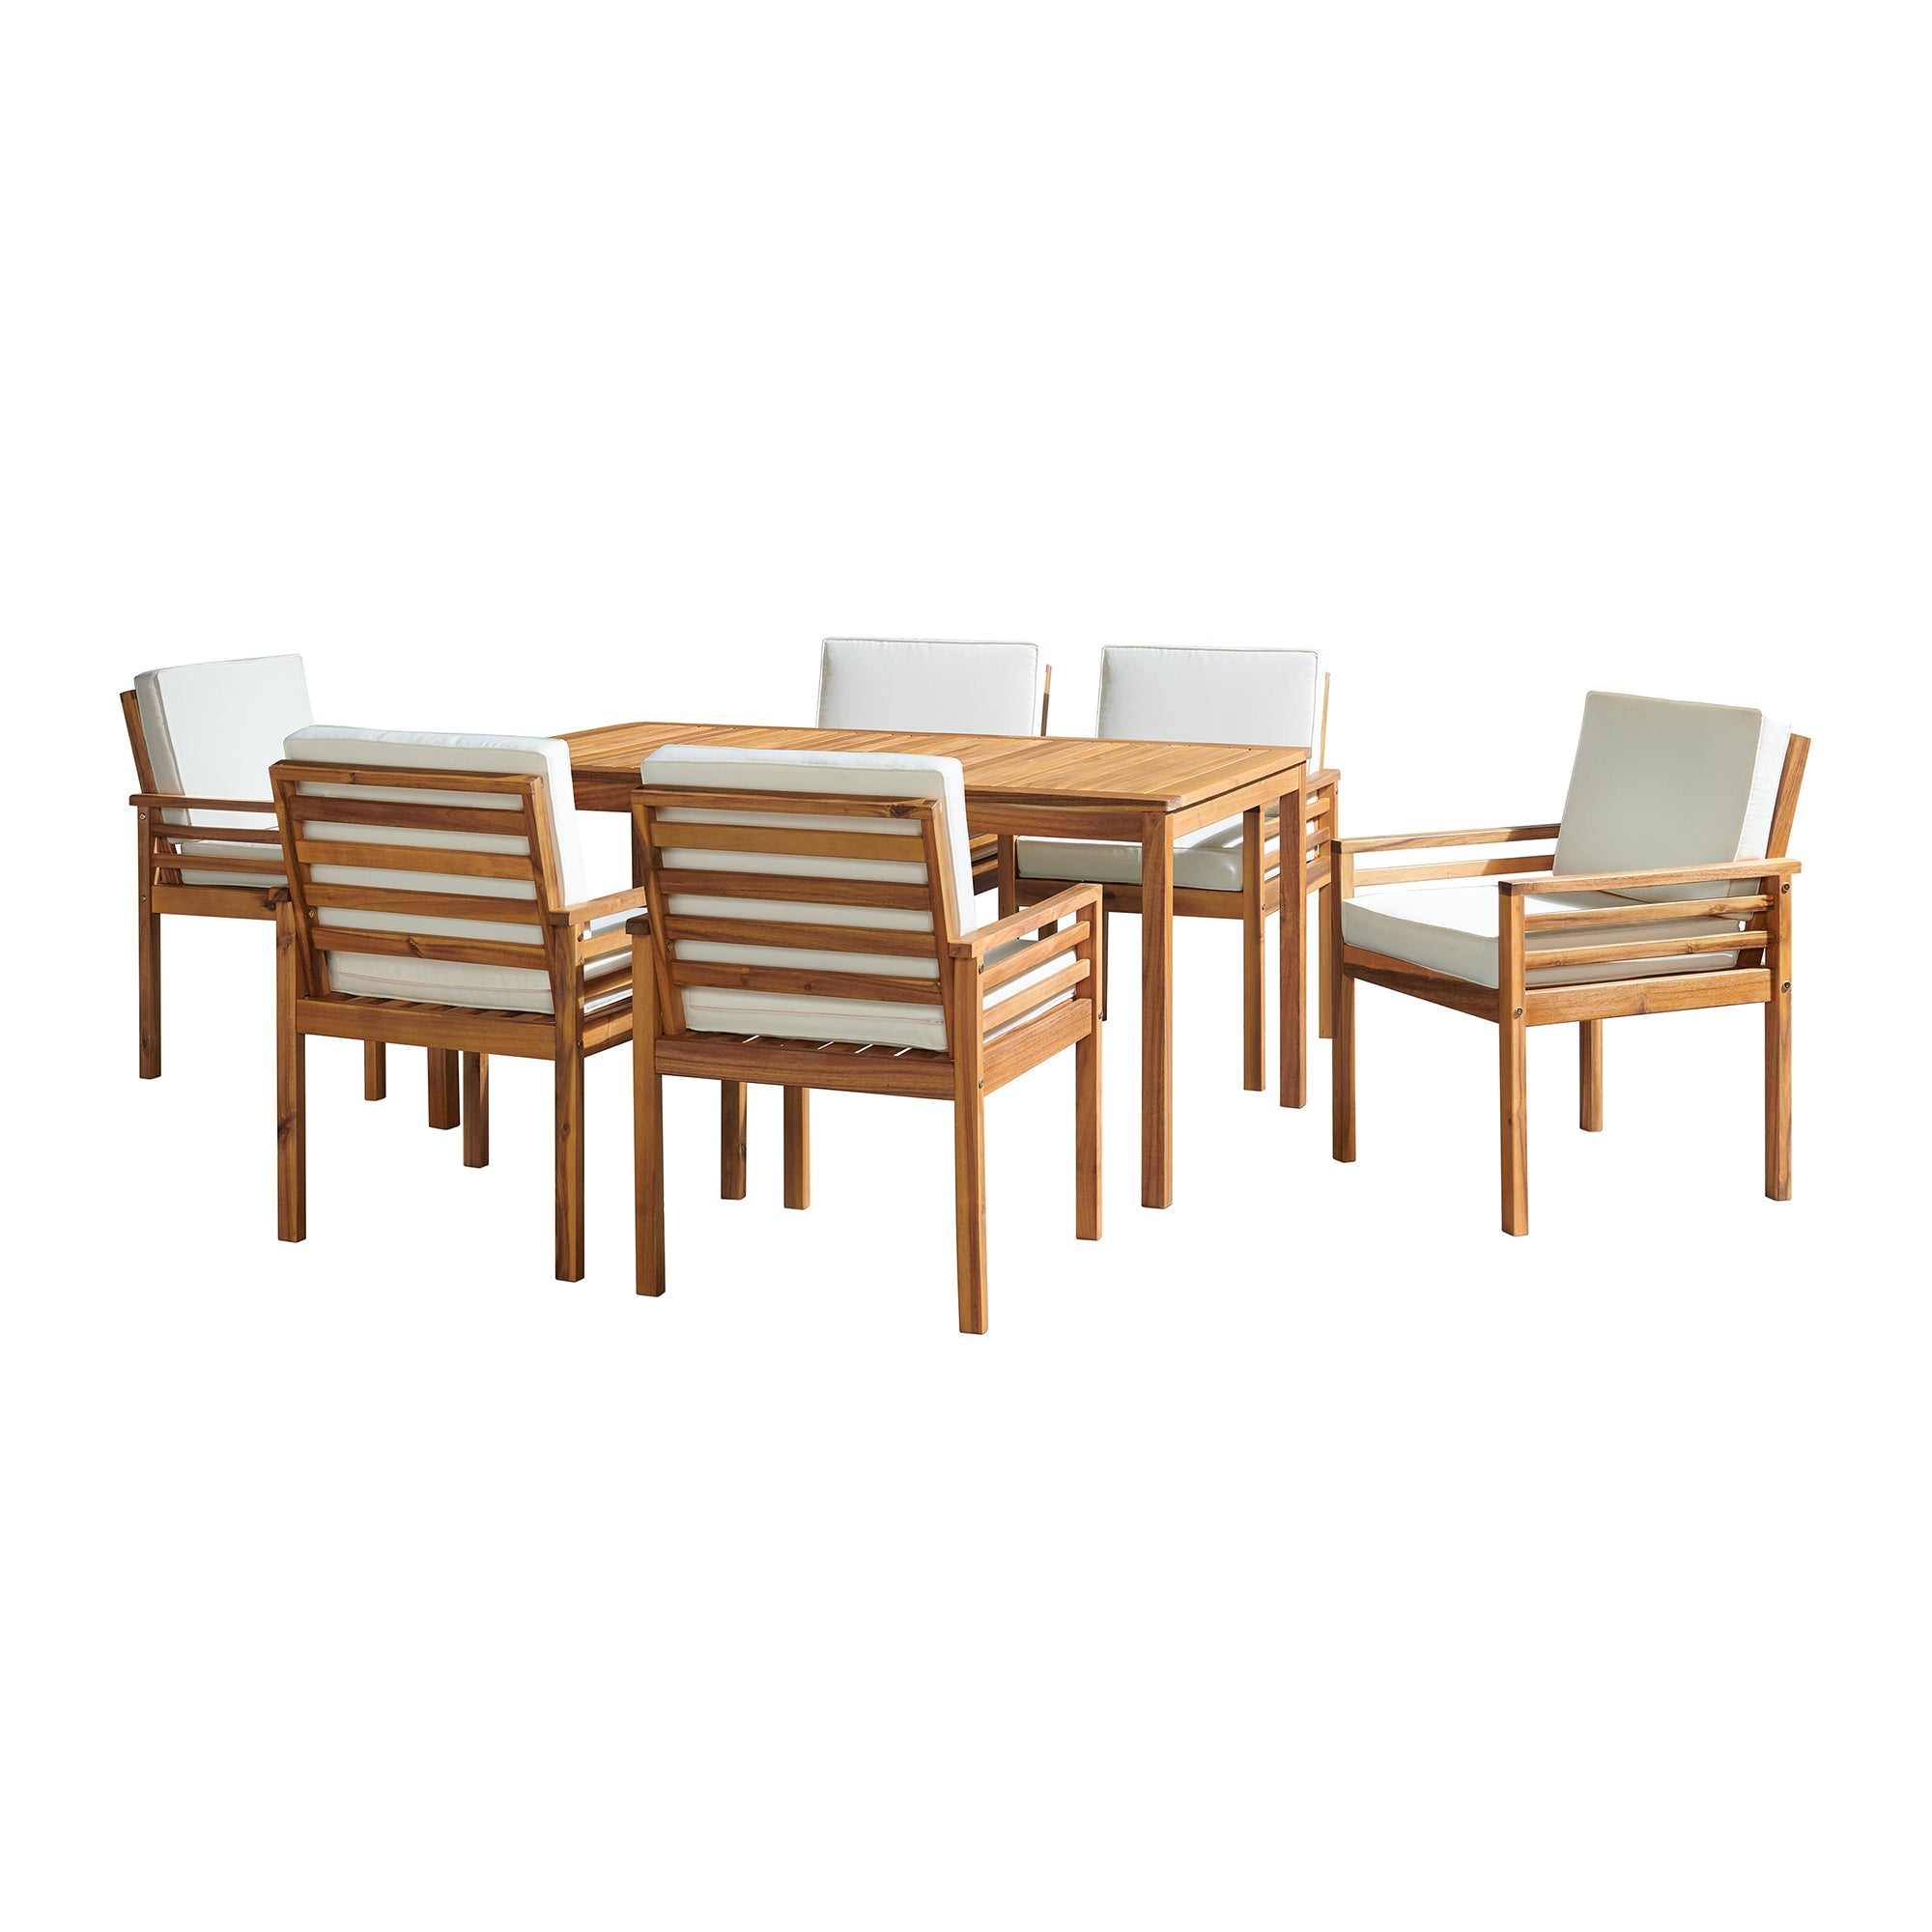 Cream Fabric FCR Okemo Acacia Wood Outdoor 7-piece Outdoor Dining Set with Table and 6 Dining Chairs with Cushions - Pier 1